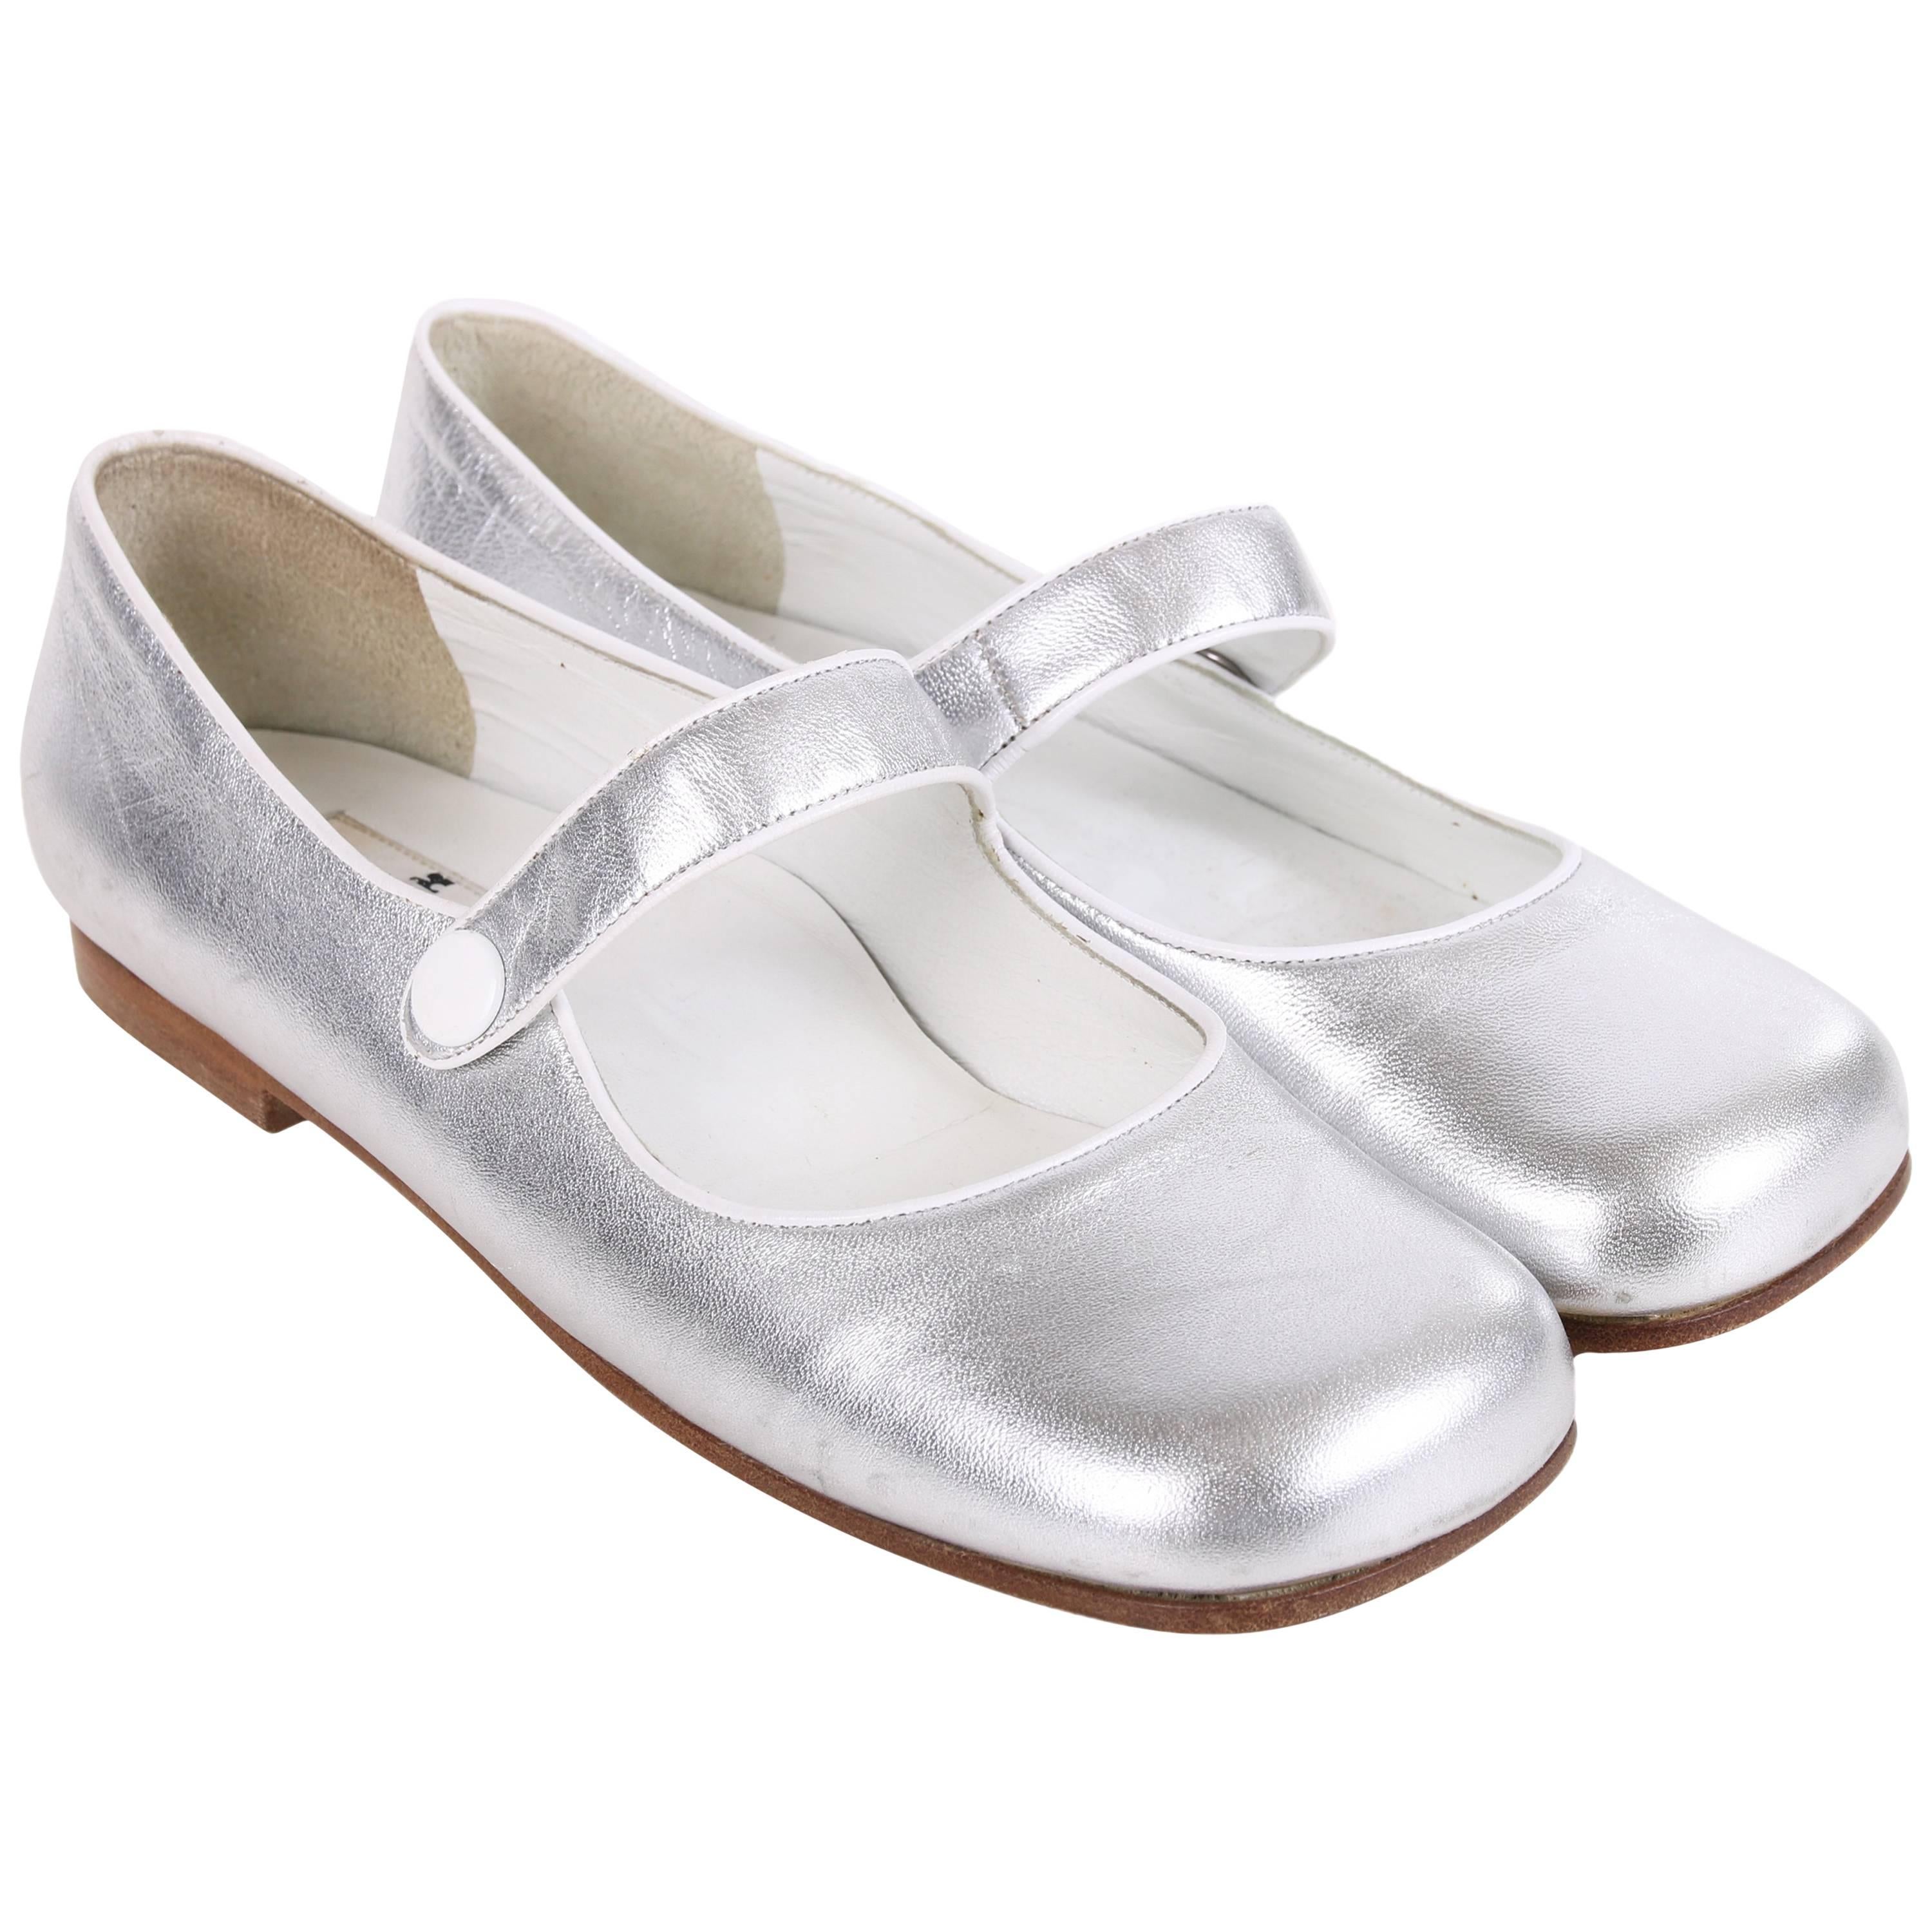 Courreges Metallic Silver Leather Mary Janes Shoes